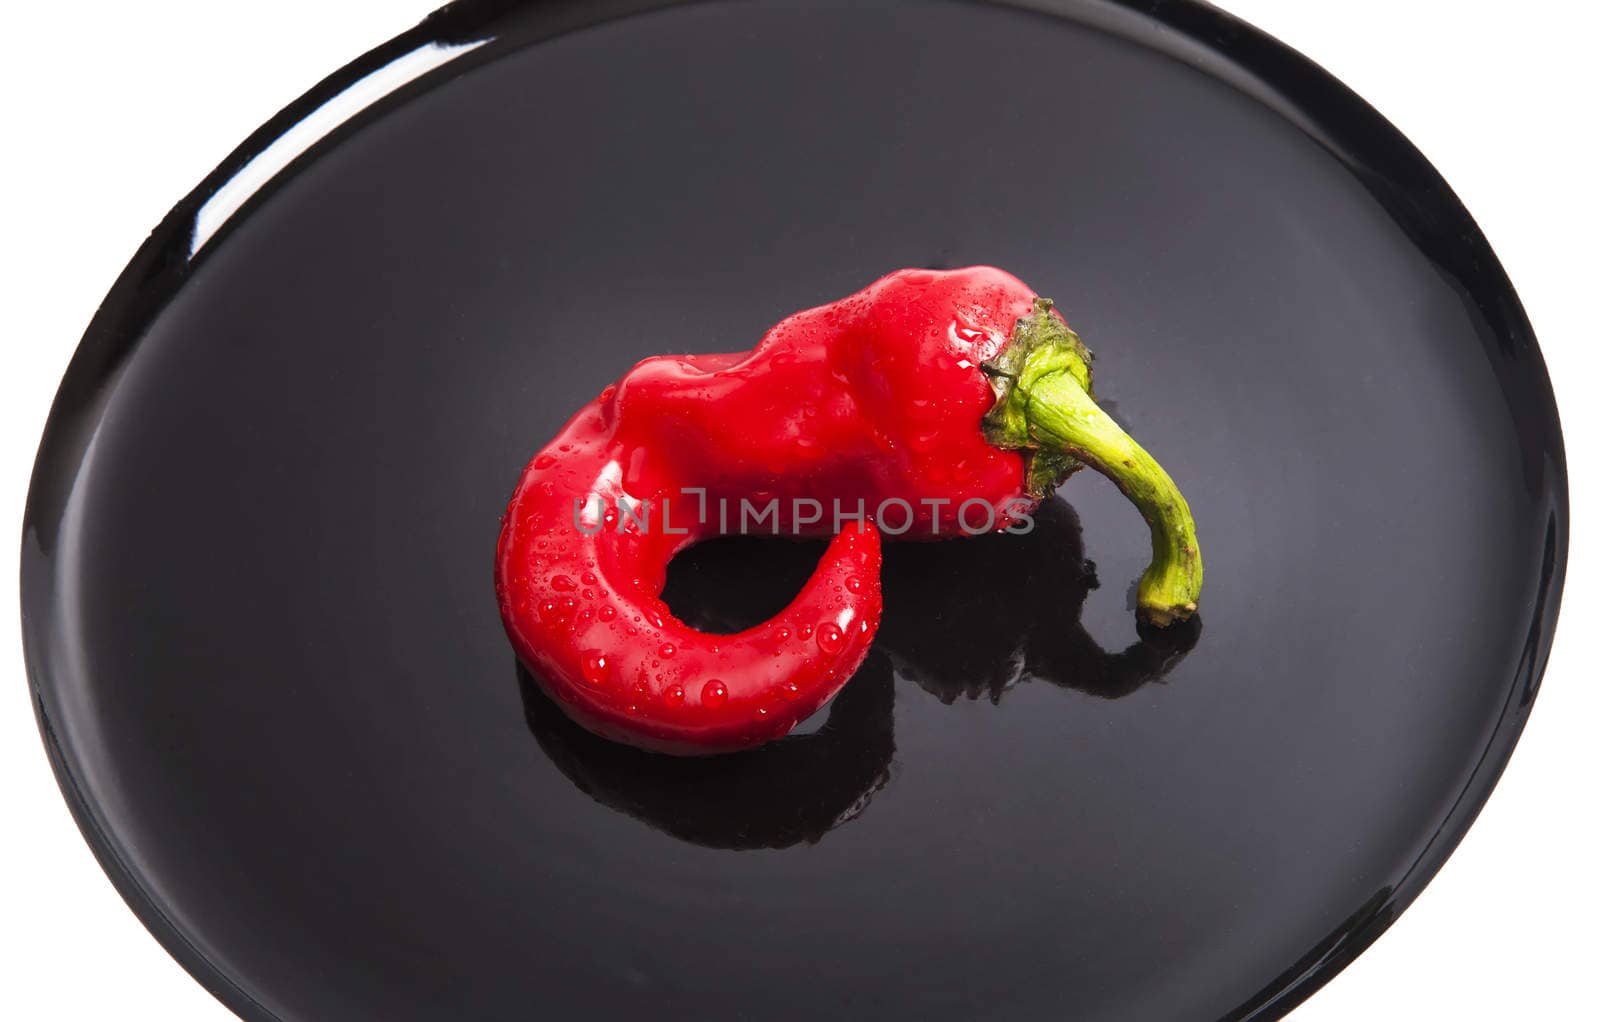 Red fresh chili pepper isolated on black plate by RawGroup